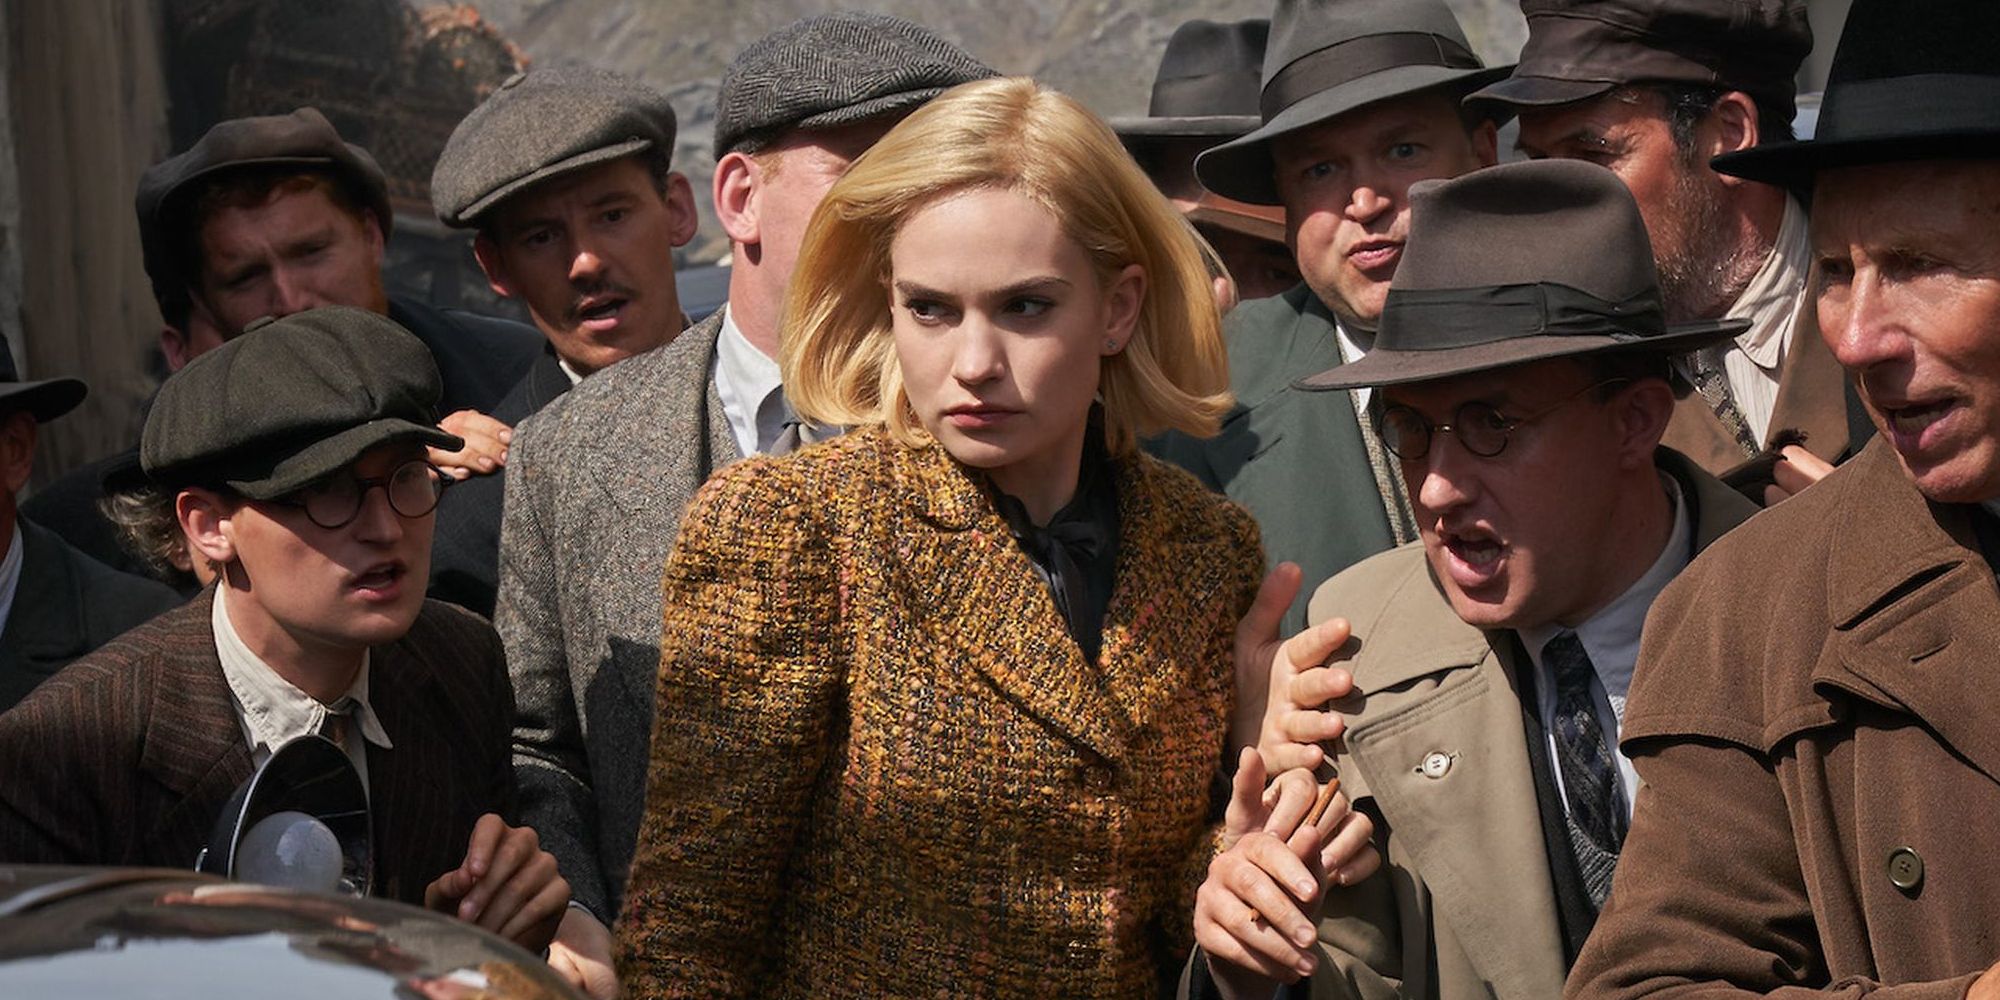 Lily James pushes through crowd in Rebecca